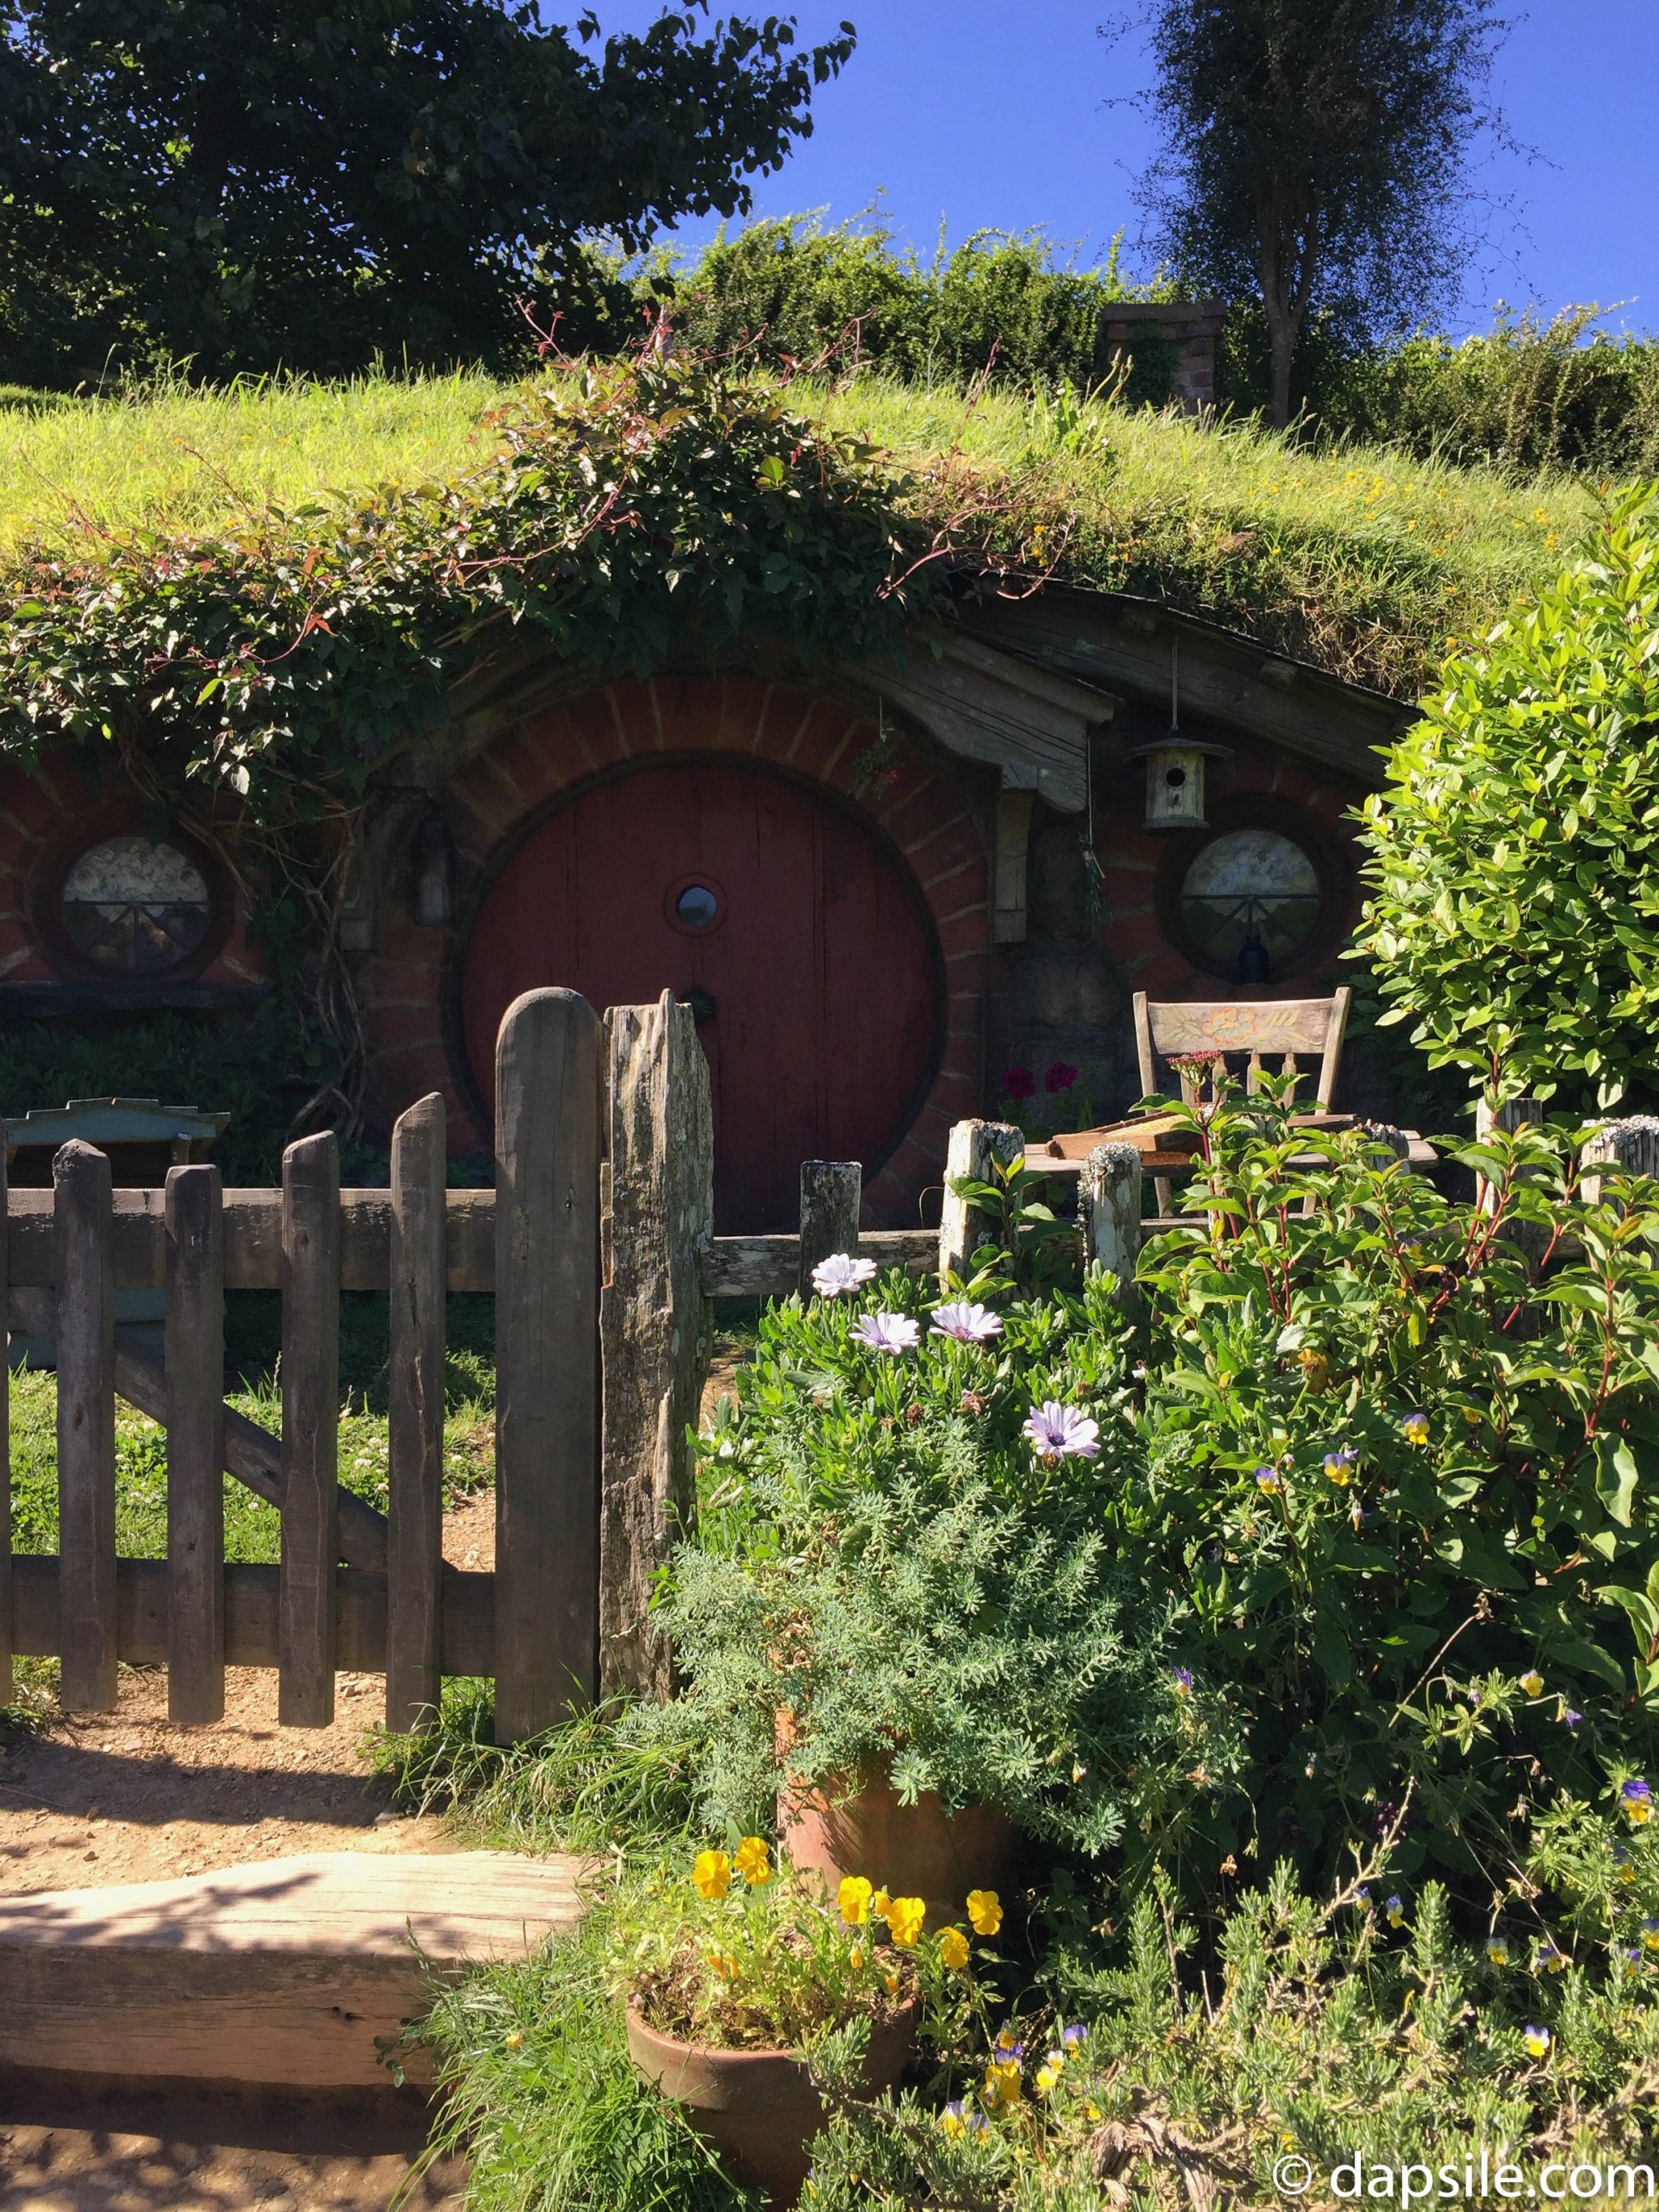 Hobbit Home with Red Door at Hobbiton on the drive from Wellington to Auckland